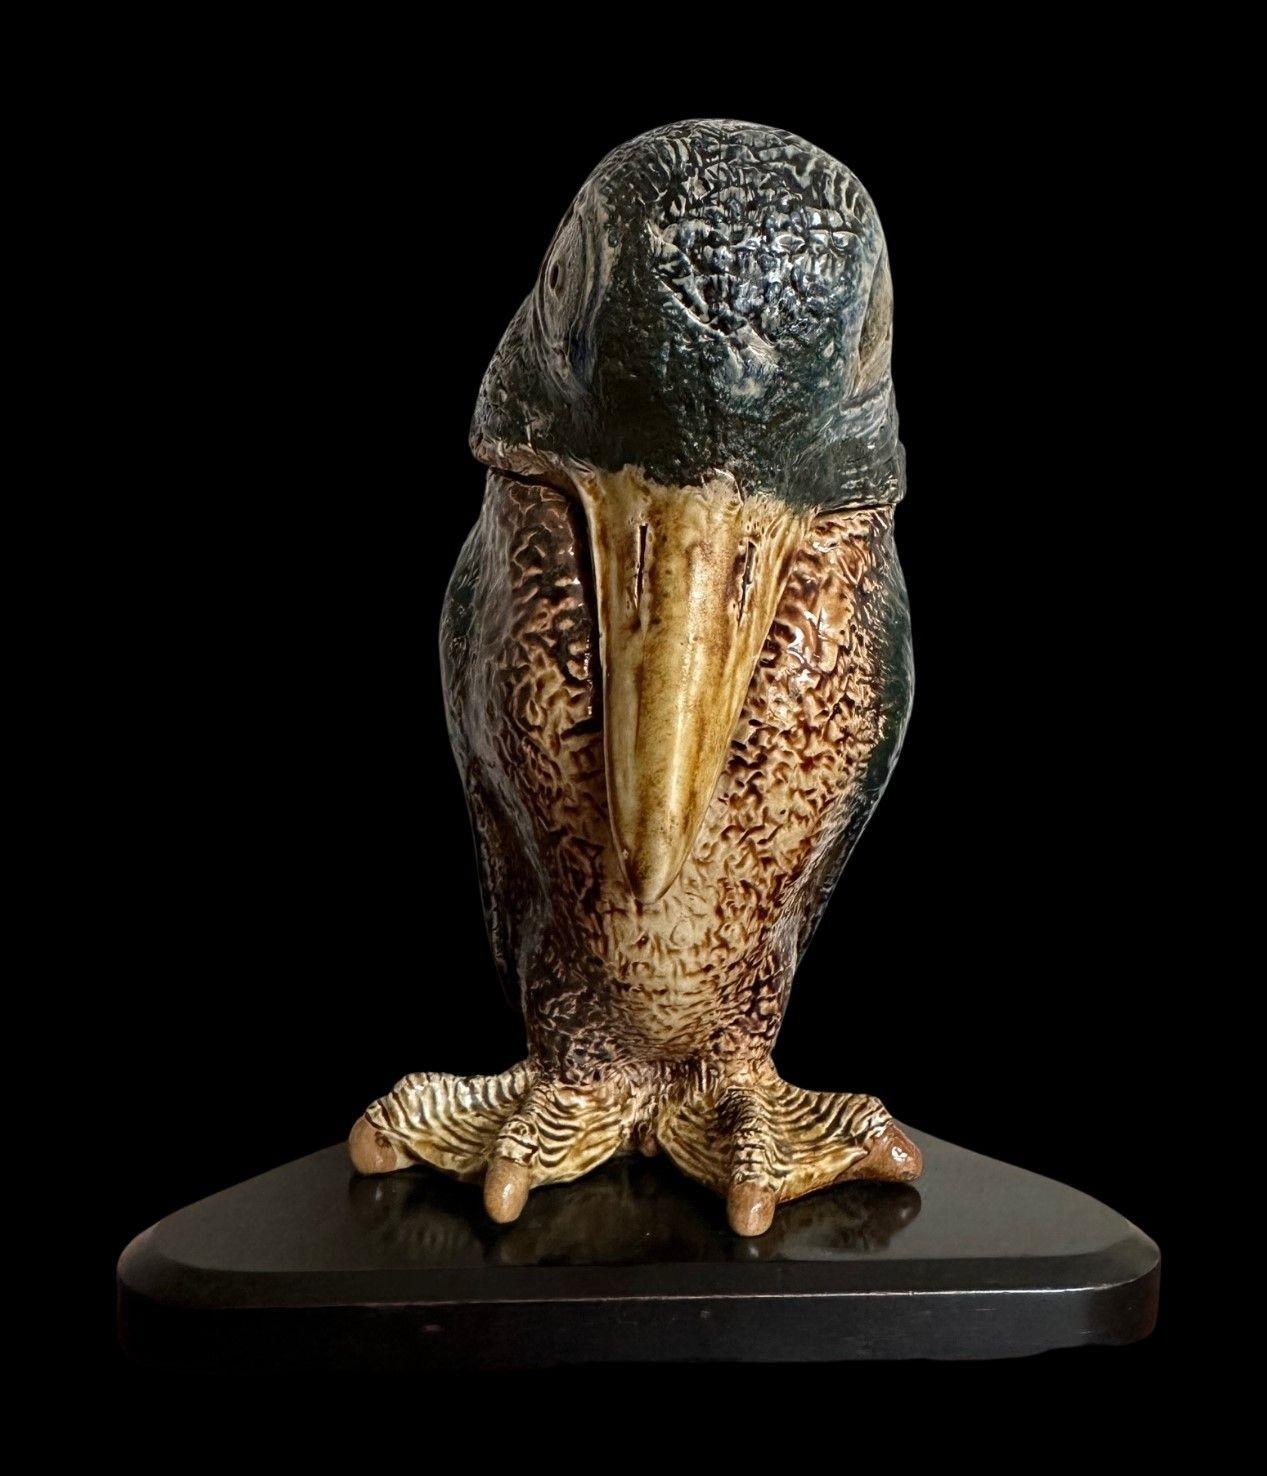 Robert Wallace Martin for the Martin Brothers.
A salt-glazed stoneware sculpture of an infant bird.
Decorated with a palate of greens, browns and blue with webbed feet and a coy expression.
This is a very early example dated 1881, and is typical